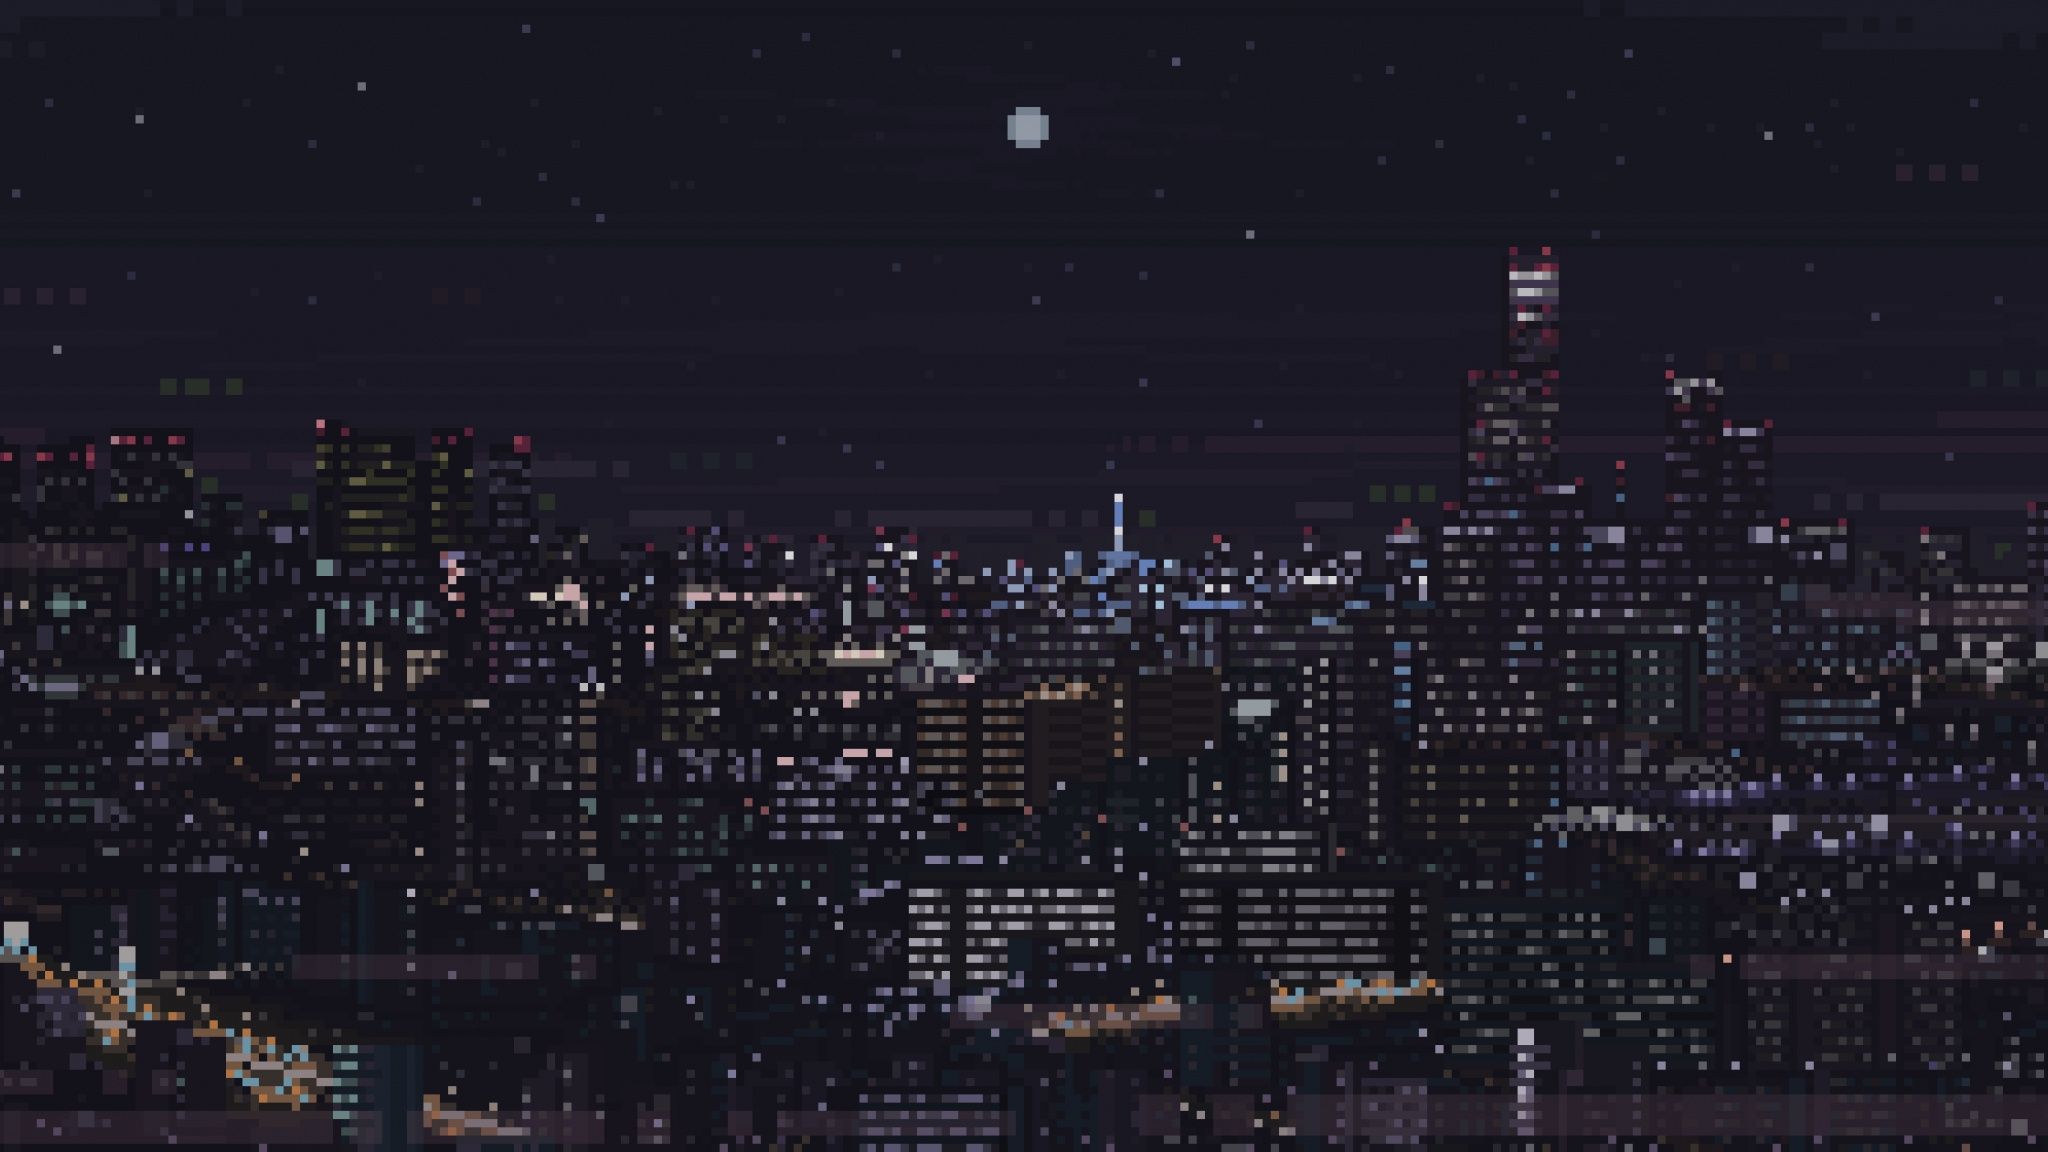 A pixel art image of a city at night with a full moon - 2048x1152